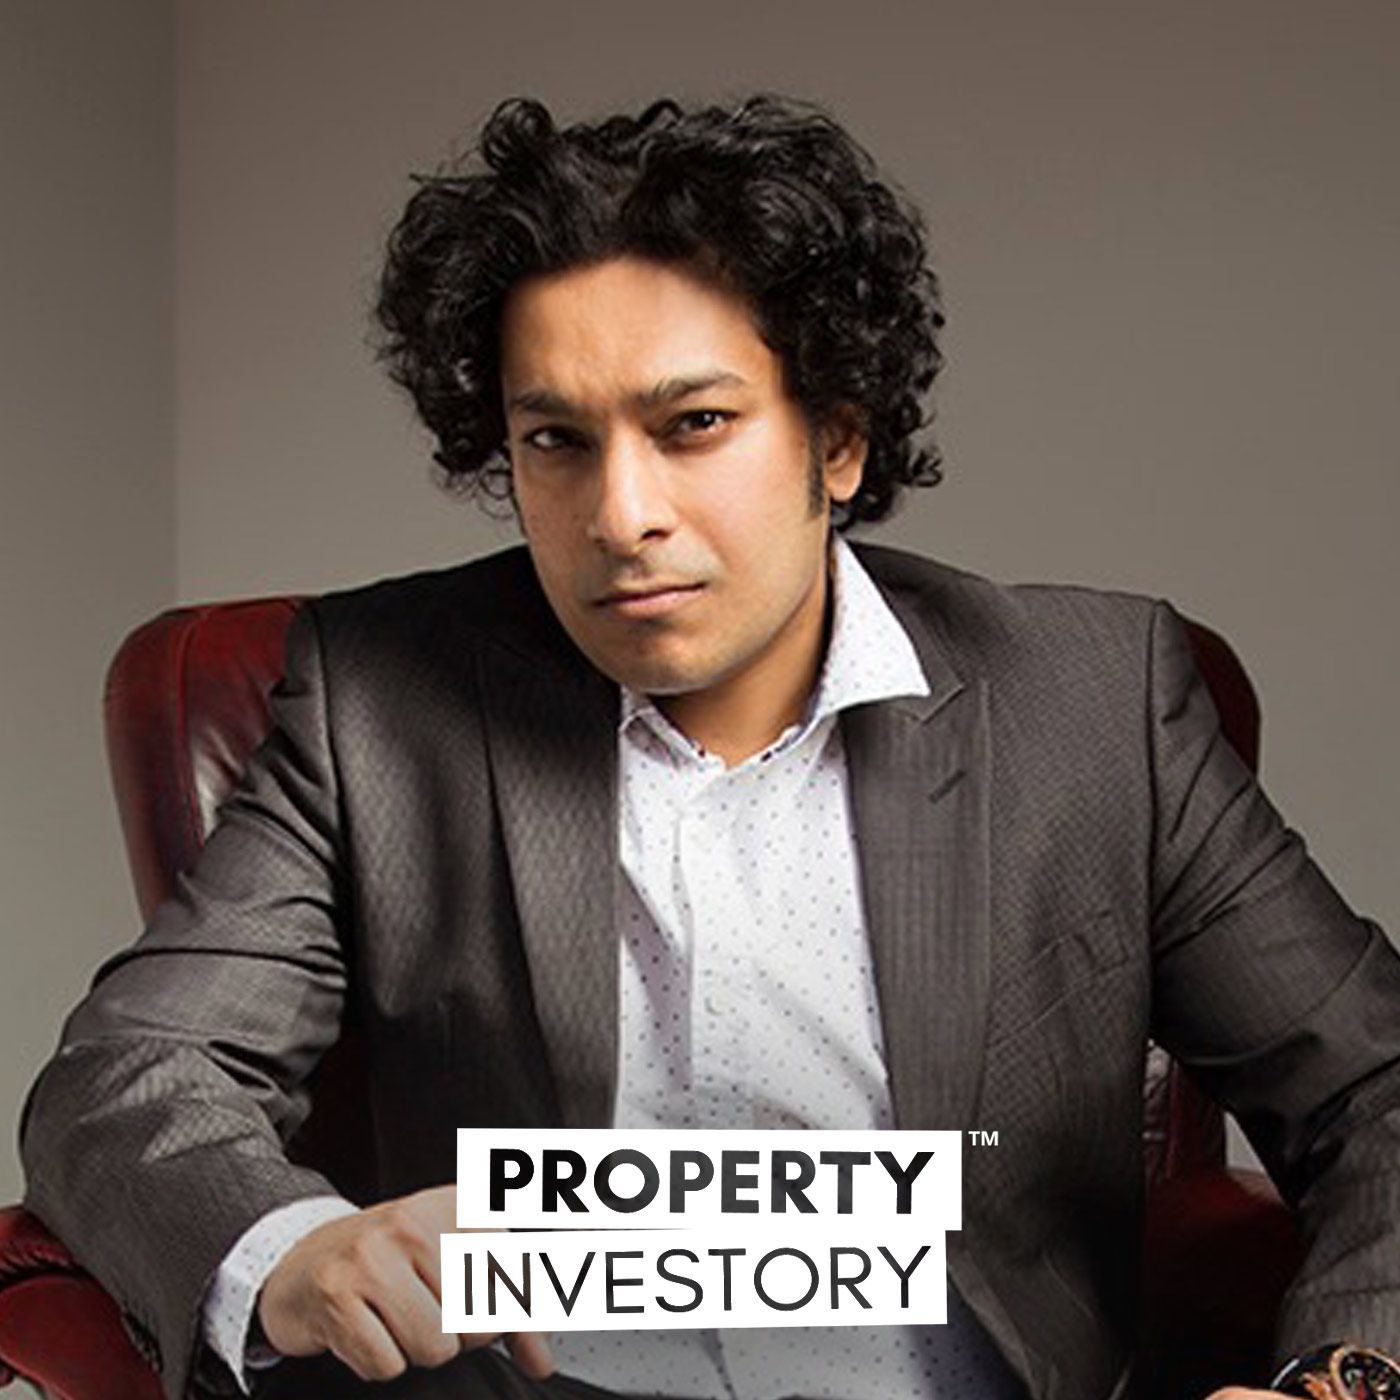 How Having The Right Attitude And Mindset Can Help You In Property Investing With Pradeep Laxminarayana